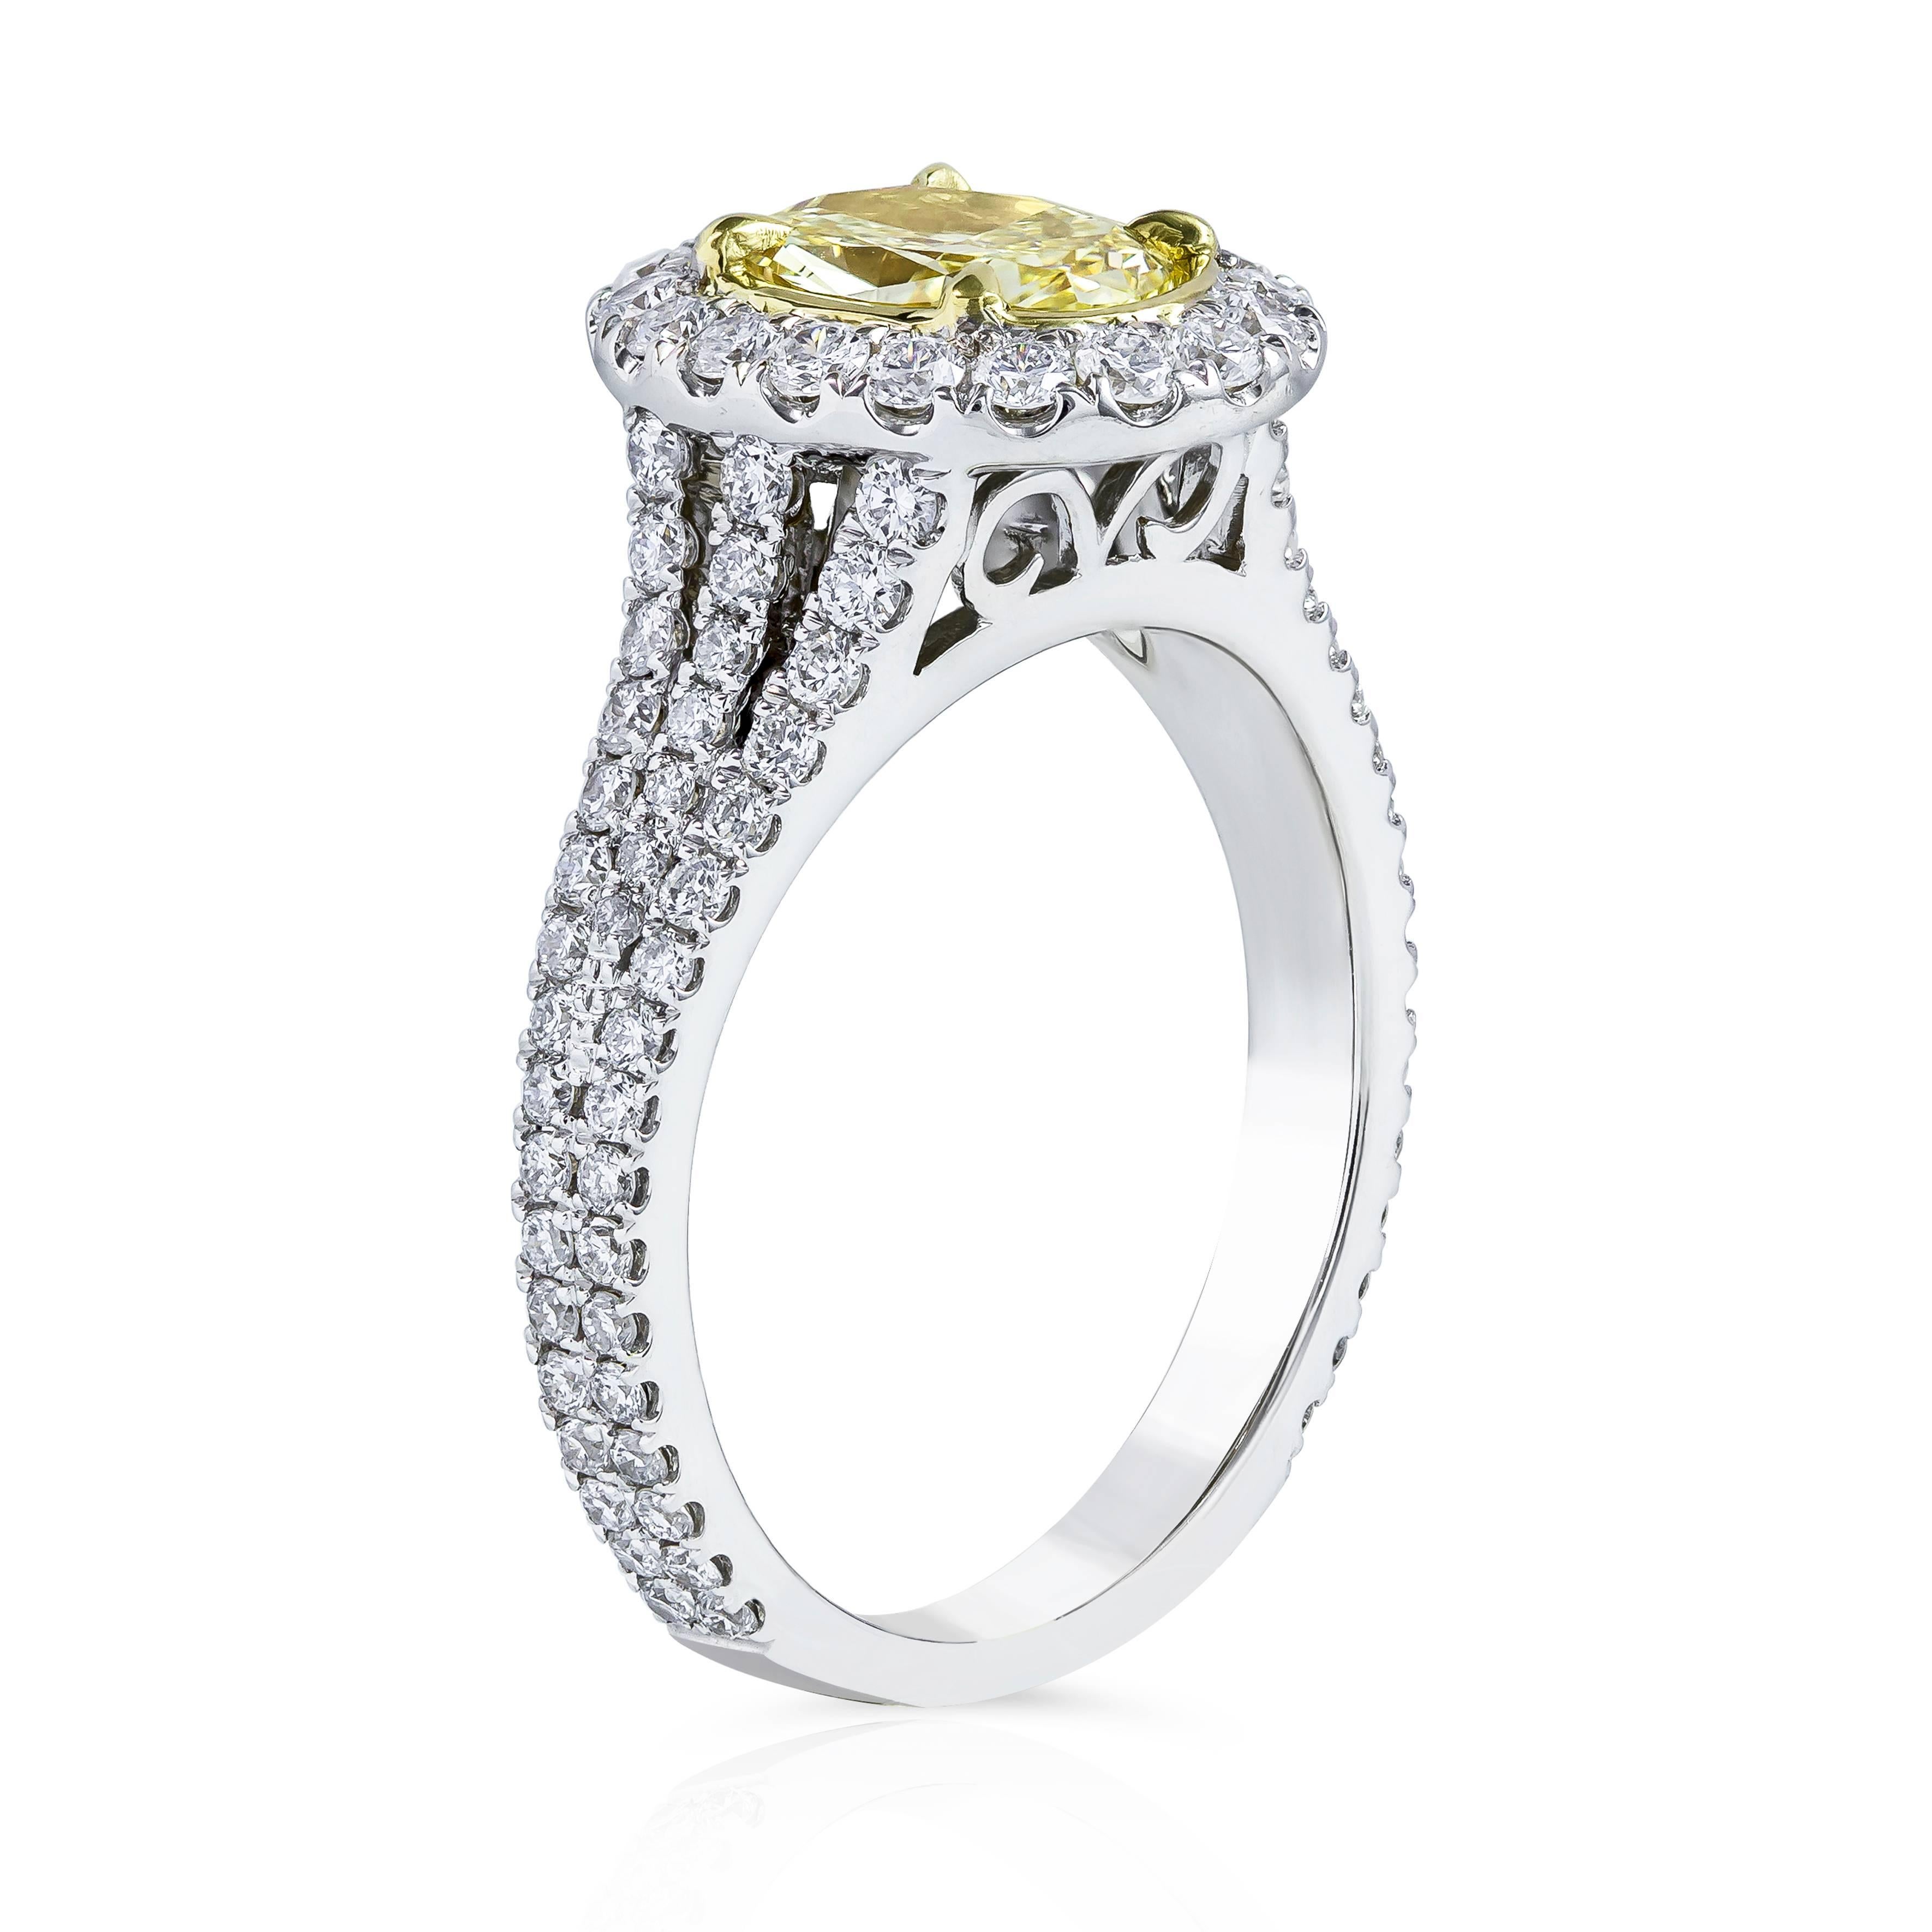 Part of our yellow diamond halo engagement rings collection, this ring features a vibrant 1.13 carat oval cut diamond center stone that GIA certified as Fancy Yellow color, VS2 clarity set in a diamond encrusted halo. Finished with an Intricately